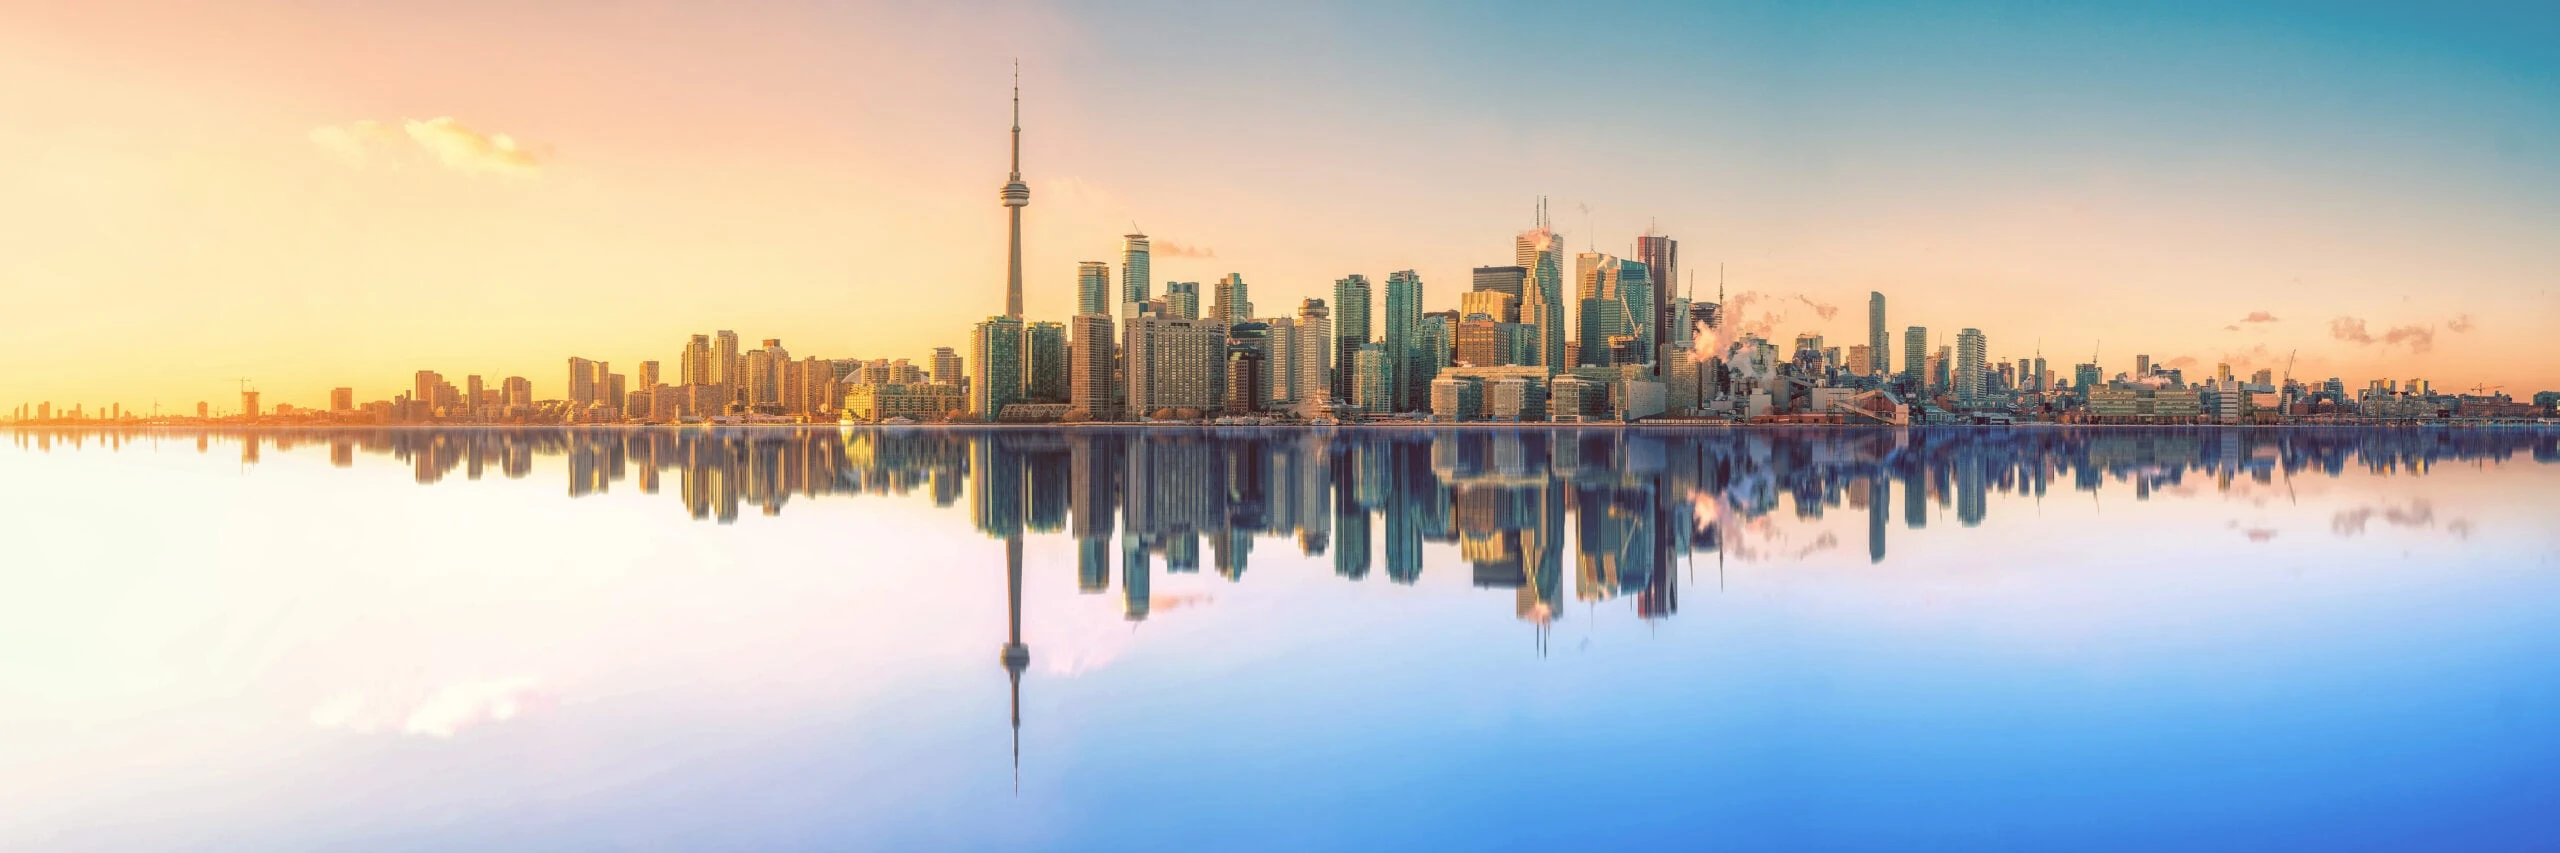 500px Photo ID: 103625221 - The Toronto skyline as seen from Algonquin Island.Stitched from 7 landscape shots and mirrored in PS CC.<a href="simonvelazquez.com">- Website</a><a href="https://www.facebook.com/SimonVPhotography">- Facebook Page</a><a href="http://instagram.com/simon_v_">- Instagram</a>